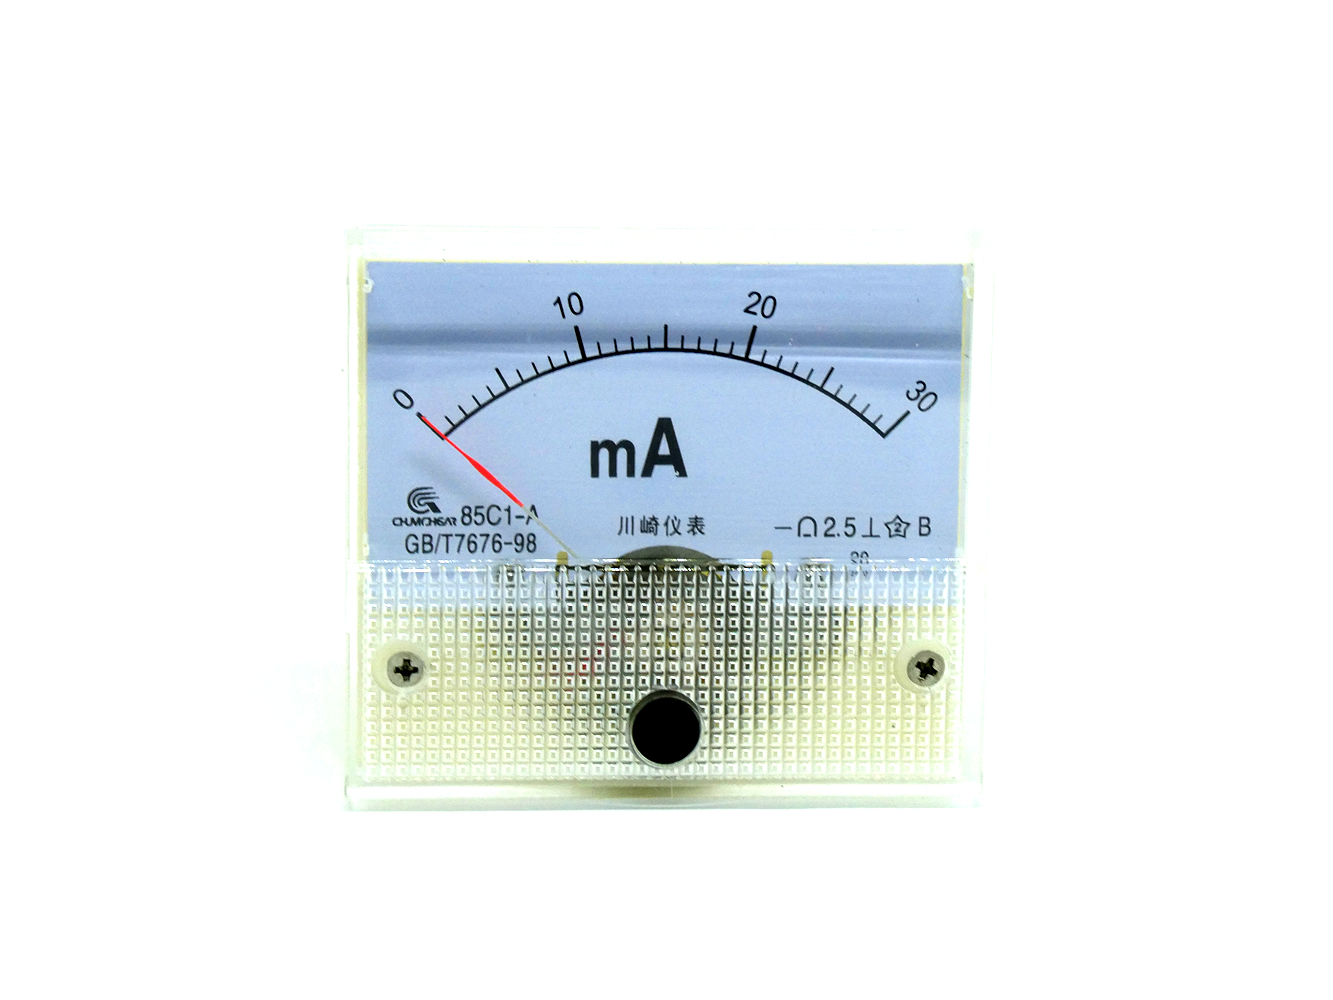 Analog Current Panel Ammeter DC 0-30mA 85C1 - Click Image to Close